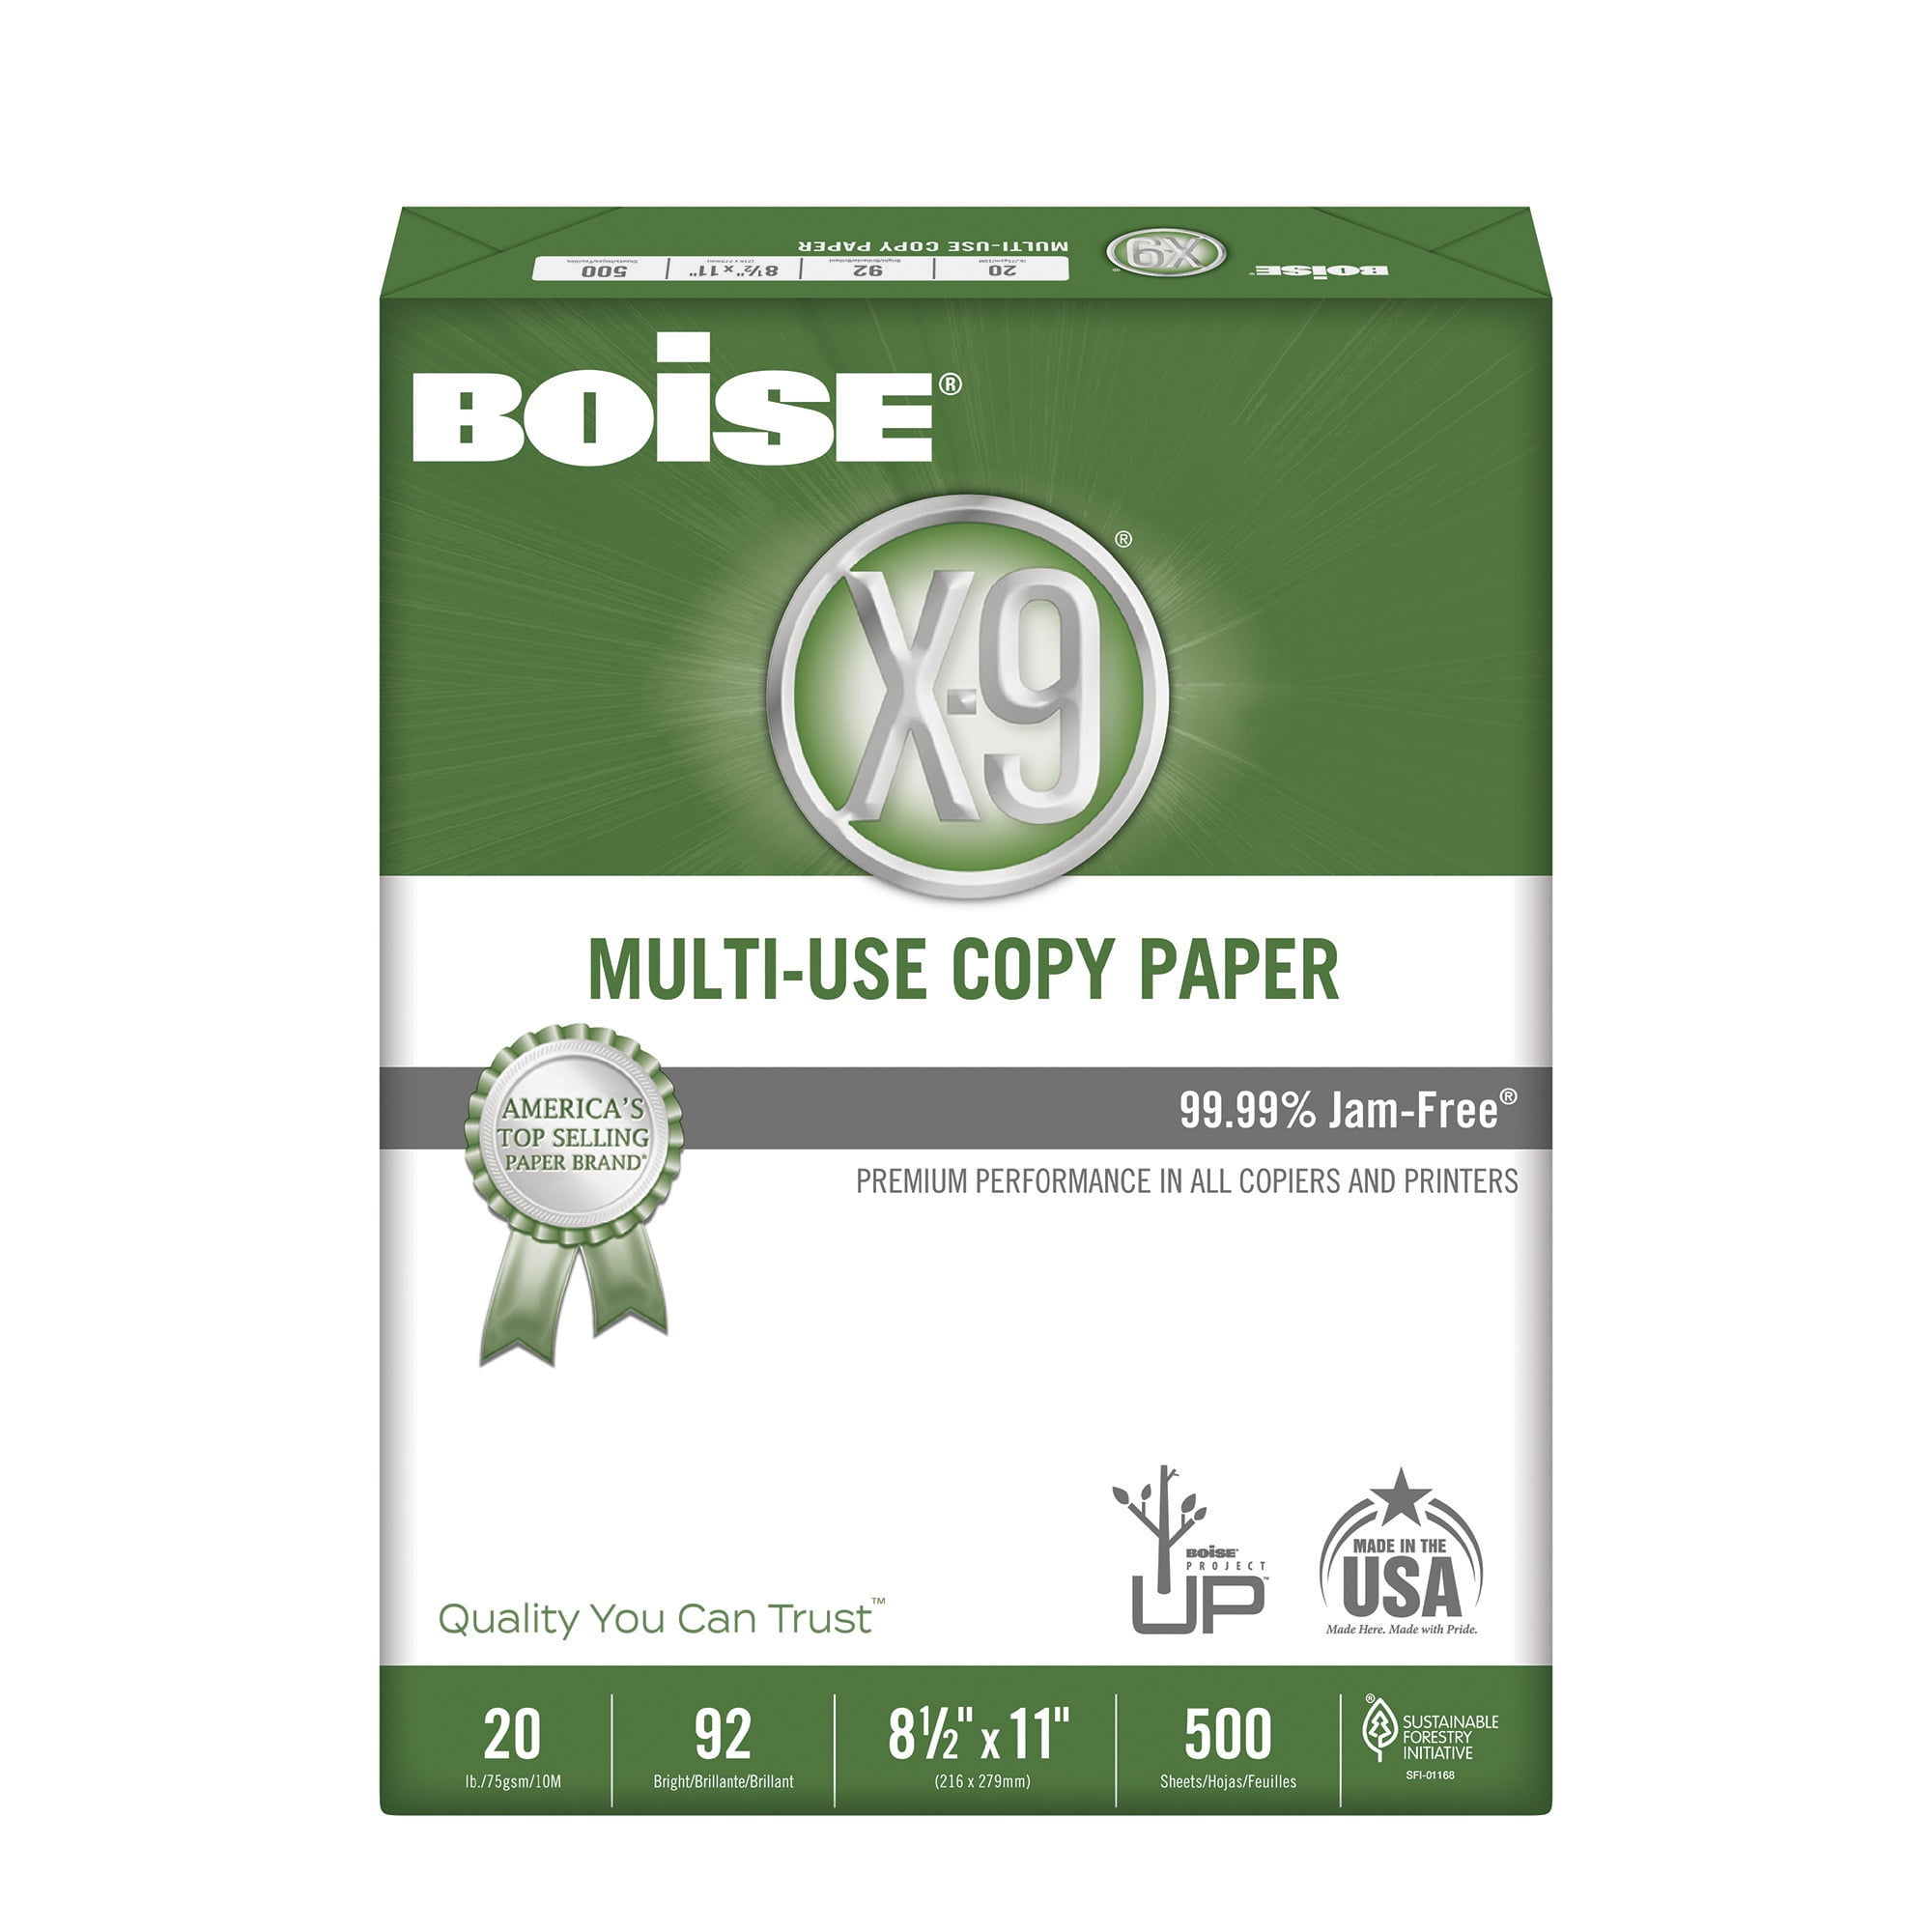 U.S. Letter Size Ream of 500 Sheets 20 Lb 108 /96 Boise X-9 High Bright Multi-Use Copy Paper US Case of 10 Reams 8 1/2 x 11 Brightness Euro 